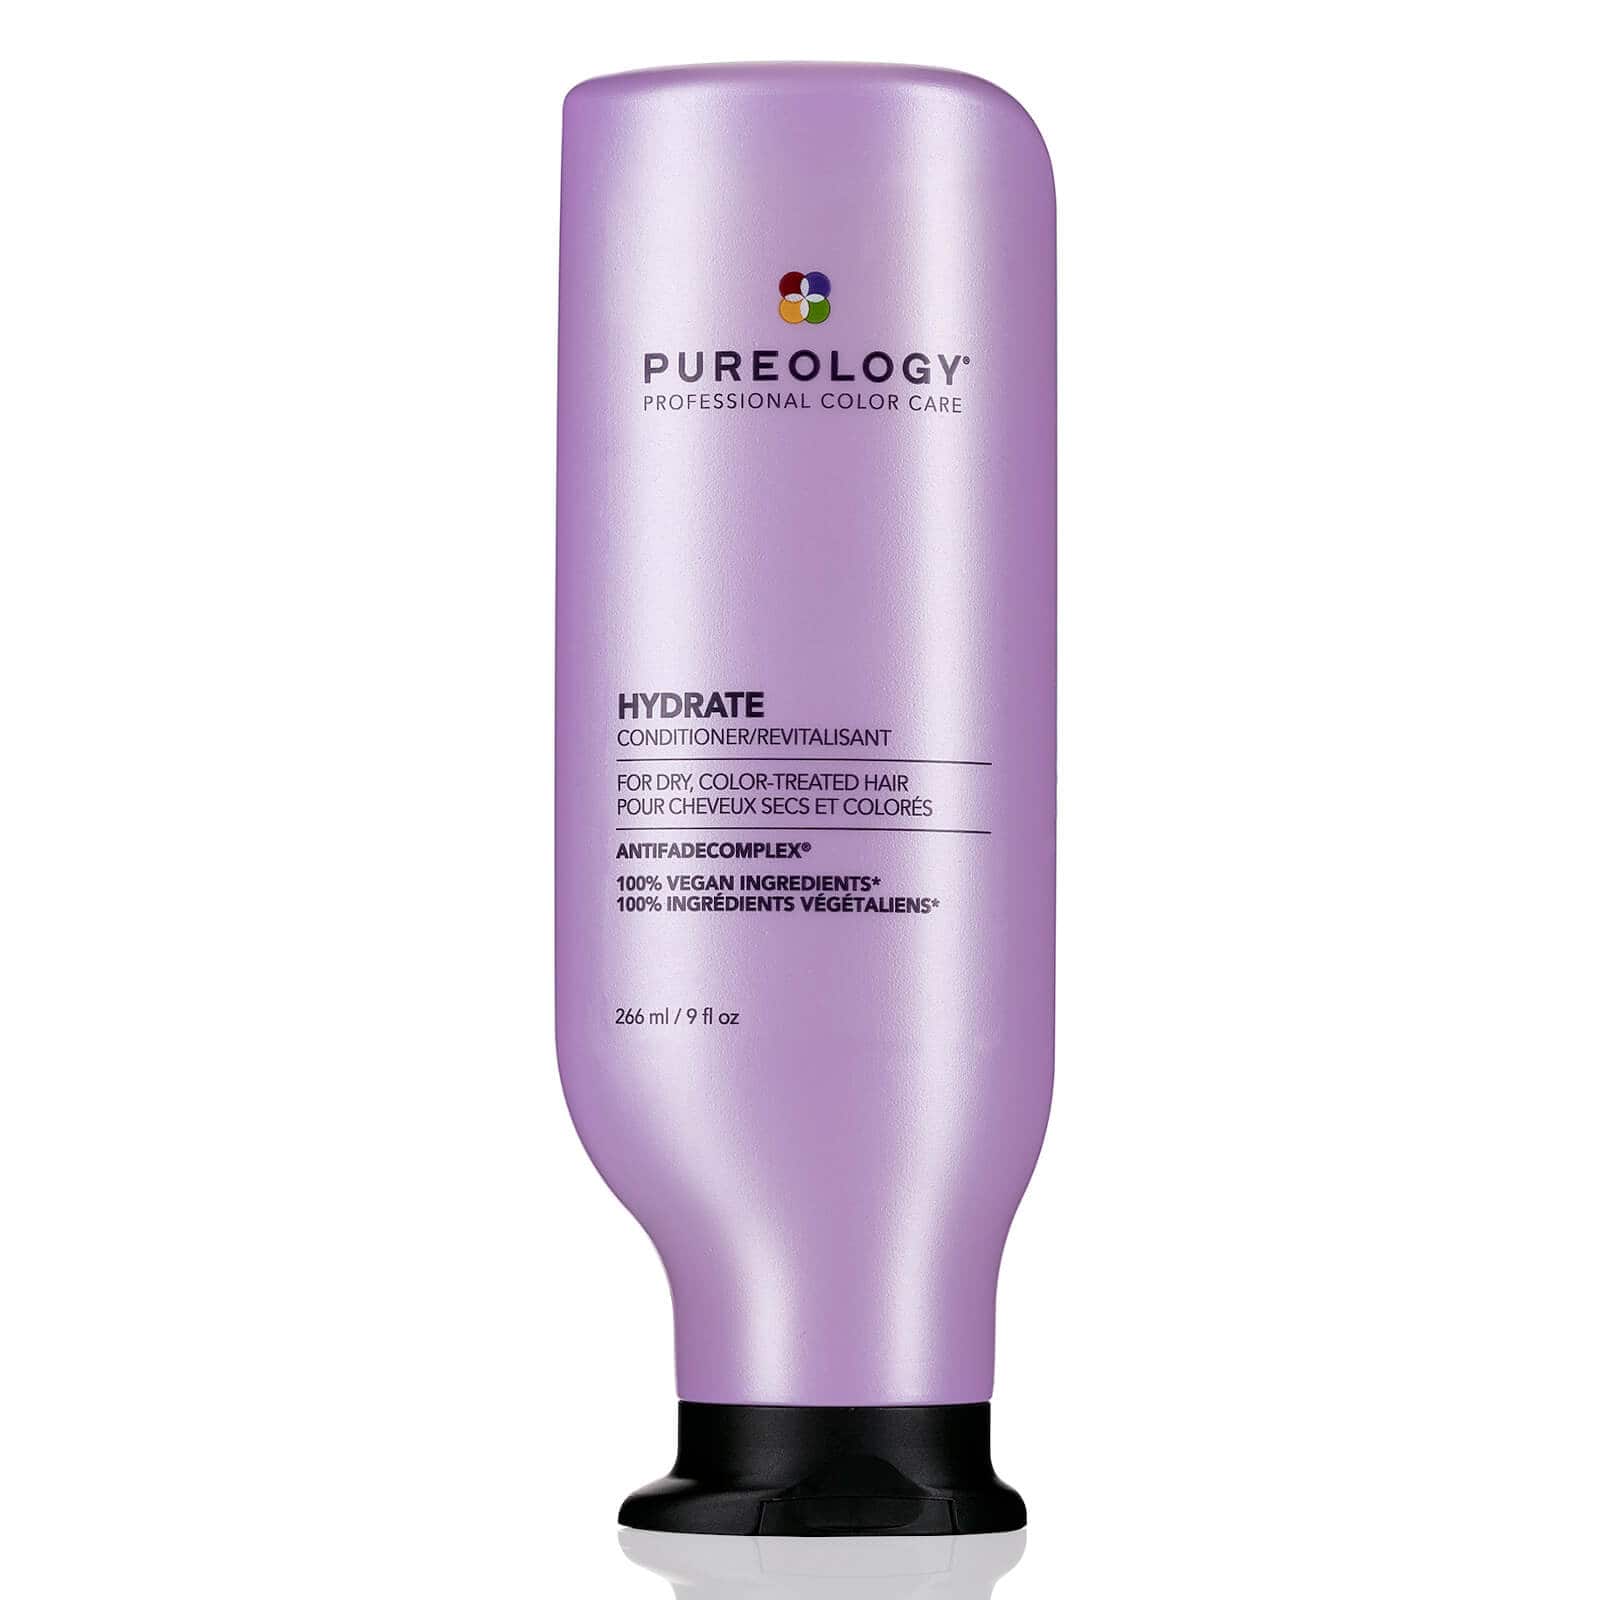 Pureology Hydrate Conditioner 266ml for medium to thick coarse dry hair